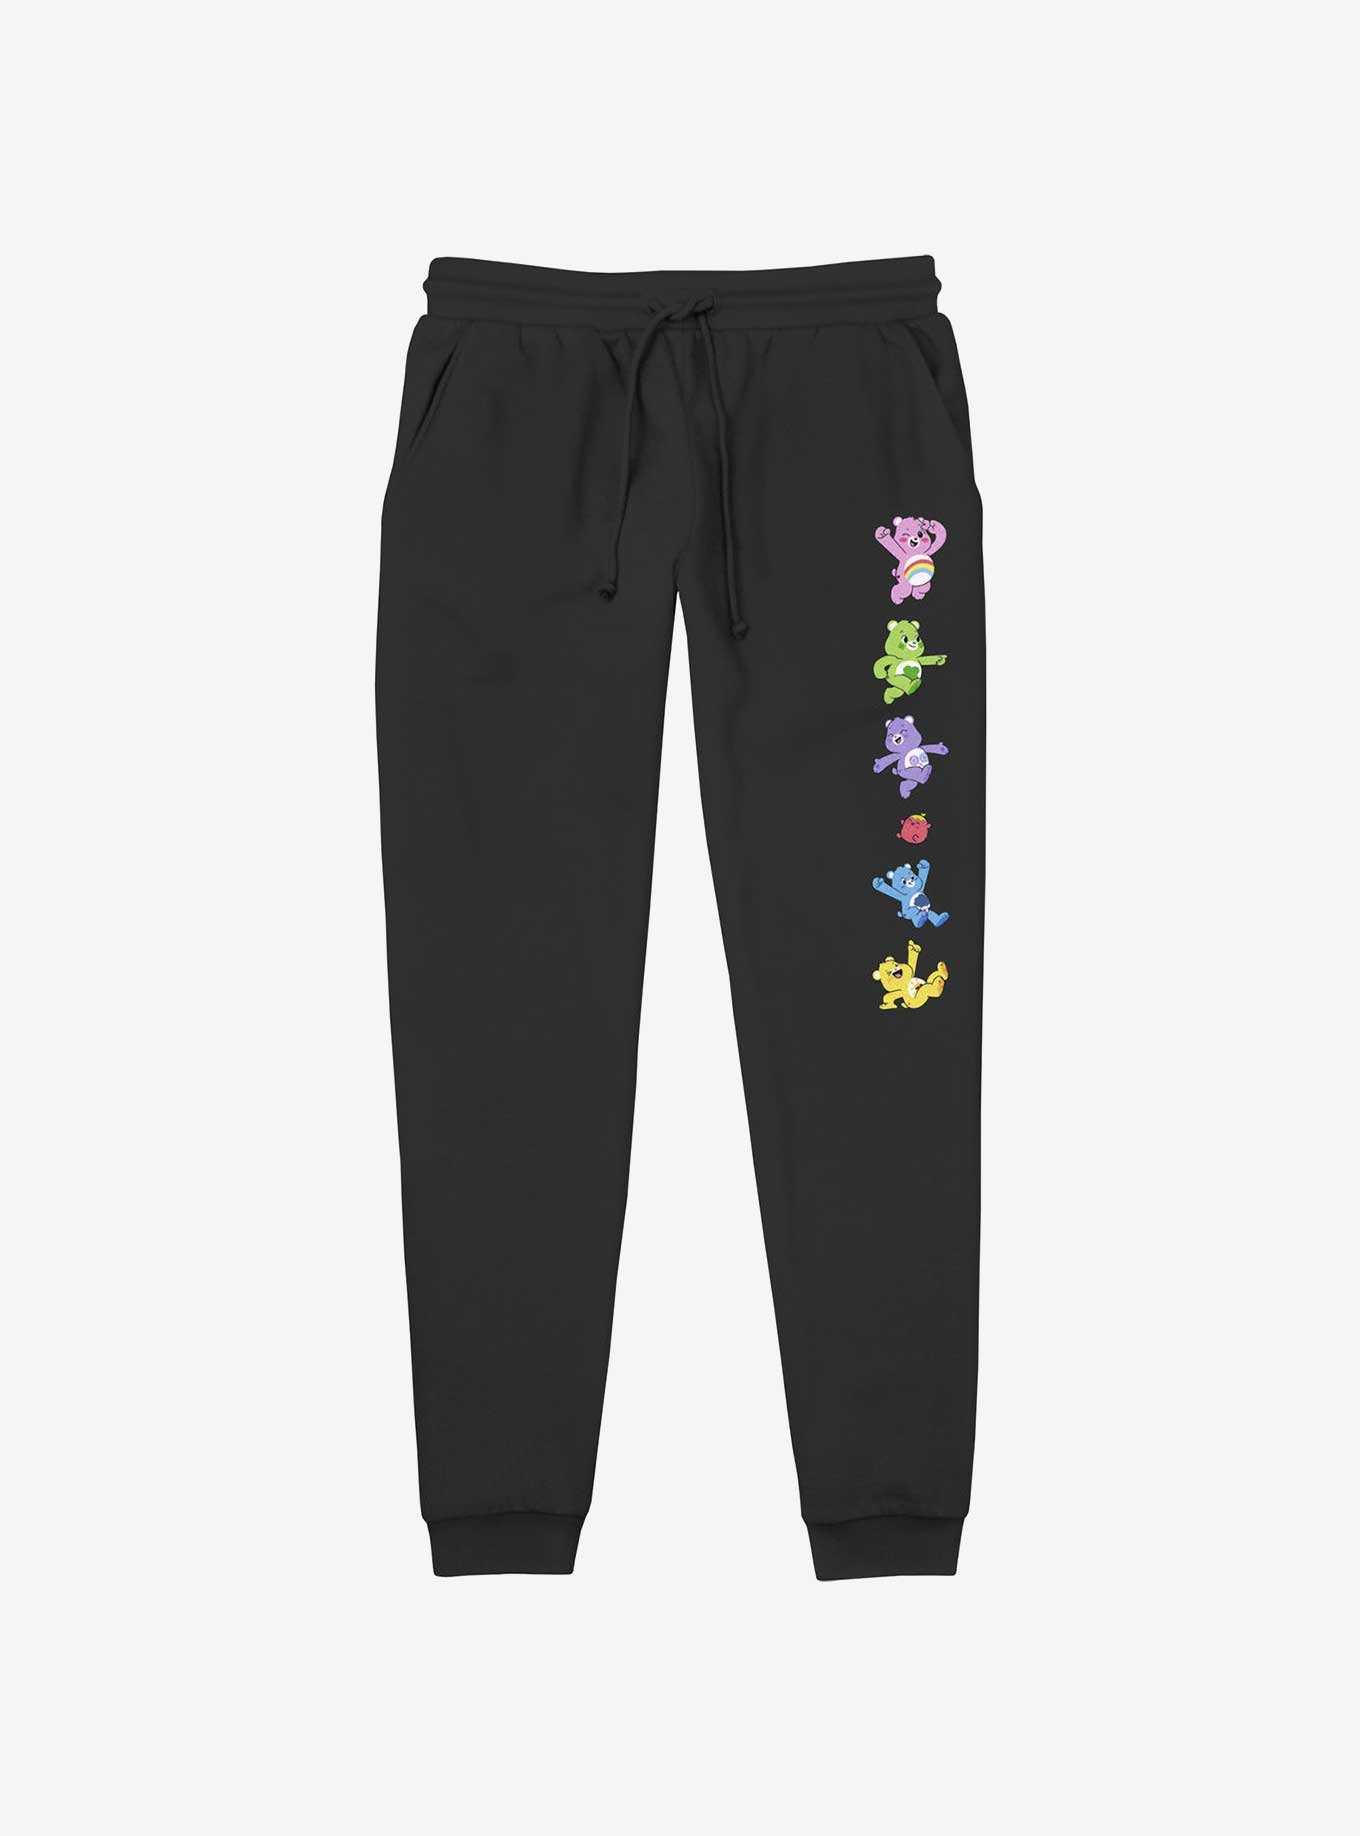 Care Bears All My Care Friends Jogger Sweatpants, , hi-res